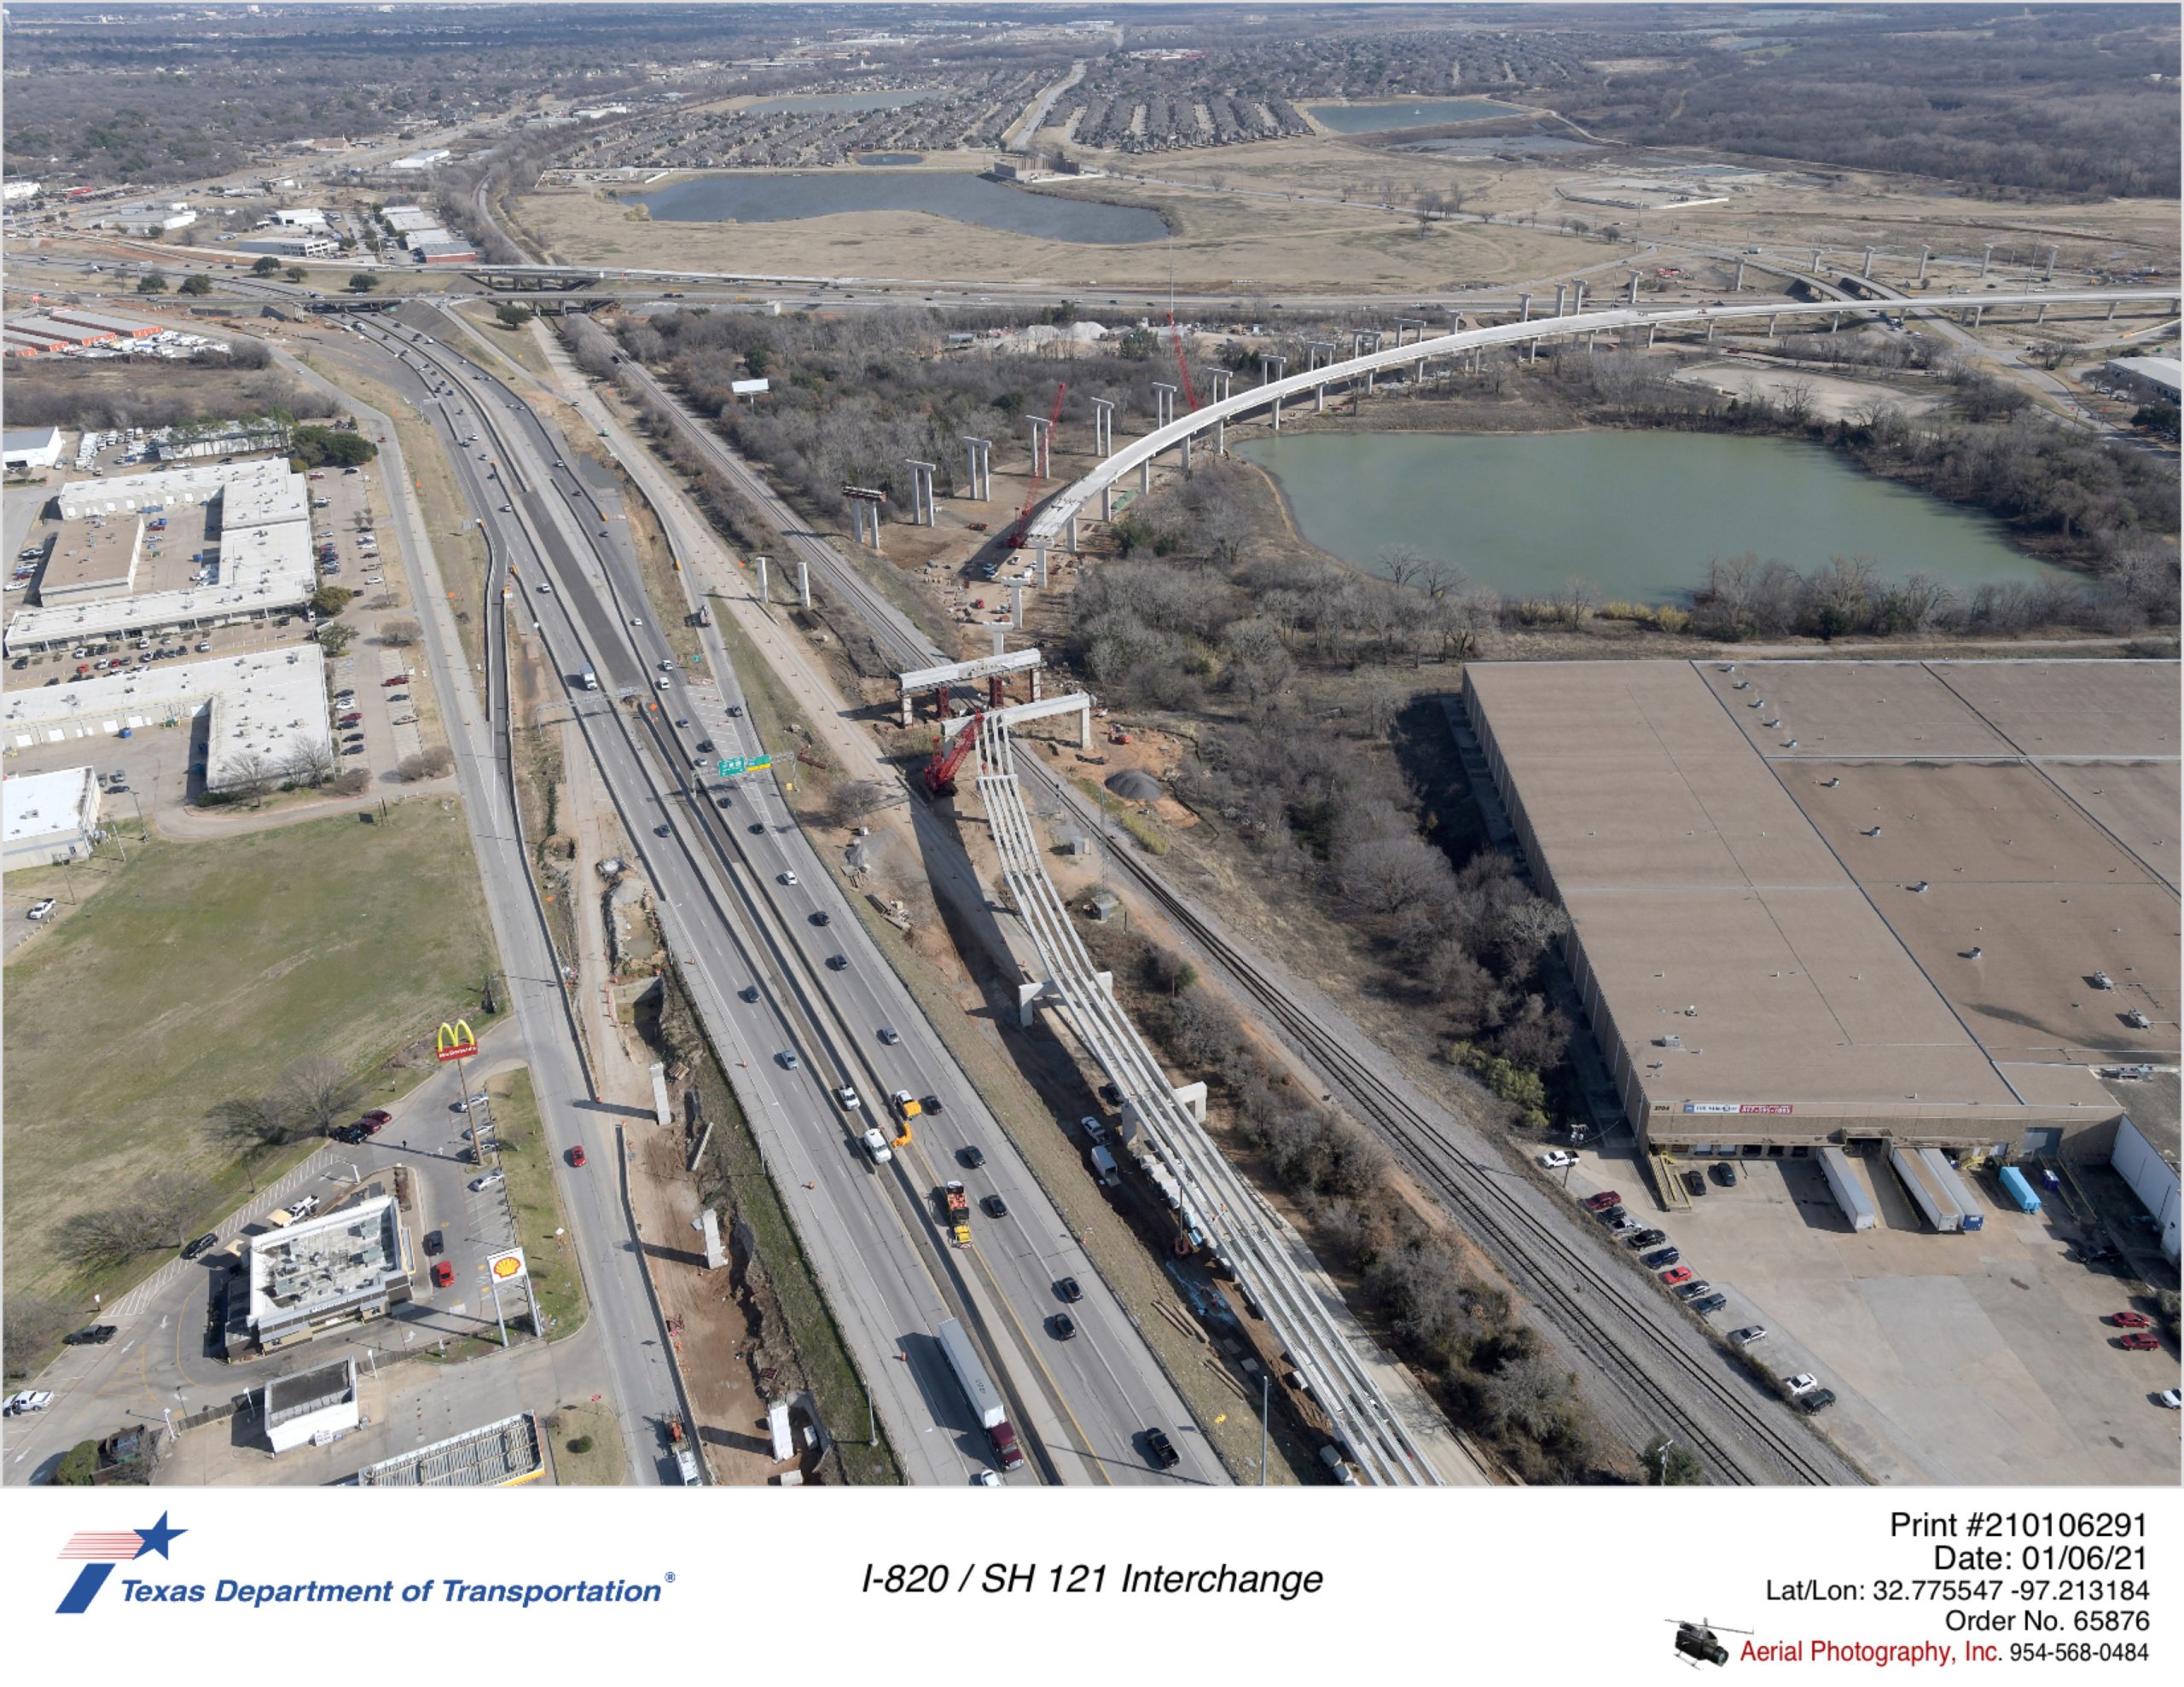 SH 121 looking northeast over Handley-Ederville Rd interchange. Construction of new direct connectors to I-820 crossing Trinity Rail Express are shown.